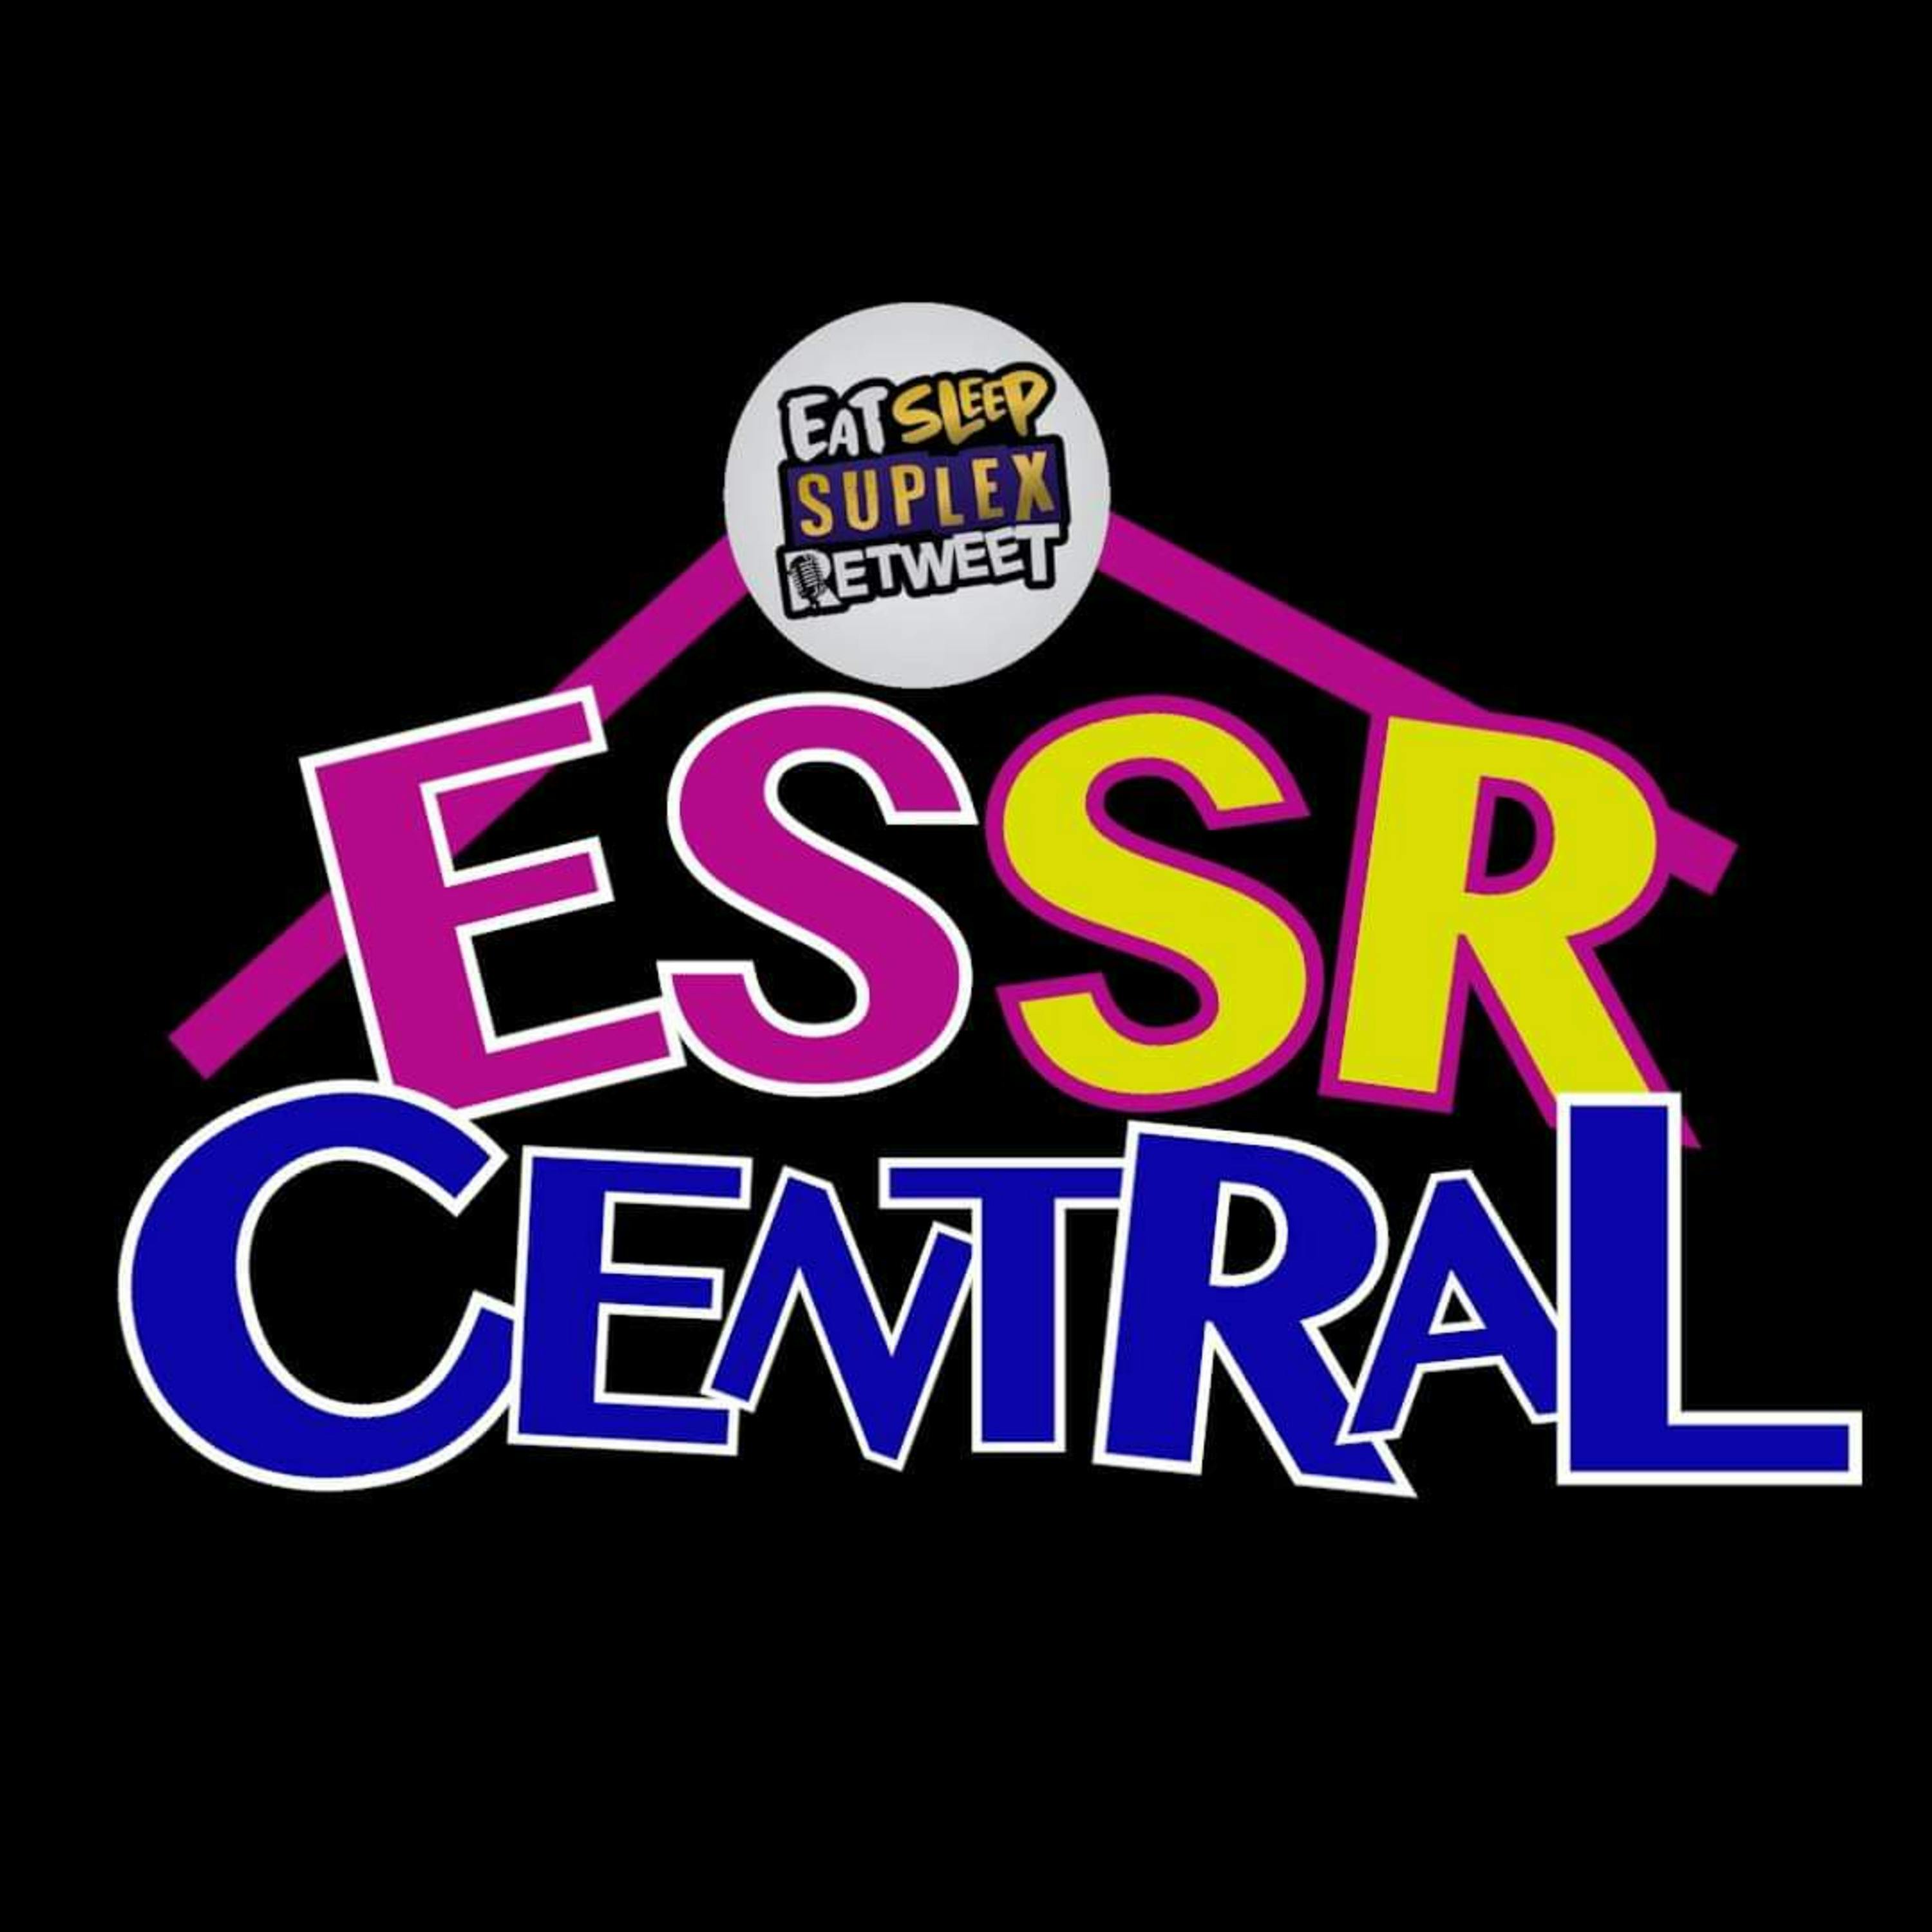 ESSR Central #046 - A Fiendish Release, New Impact Streaming & Cole's Disputed Contract